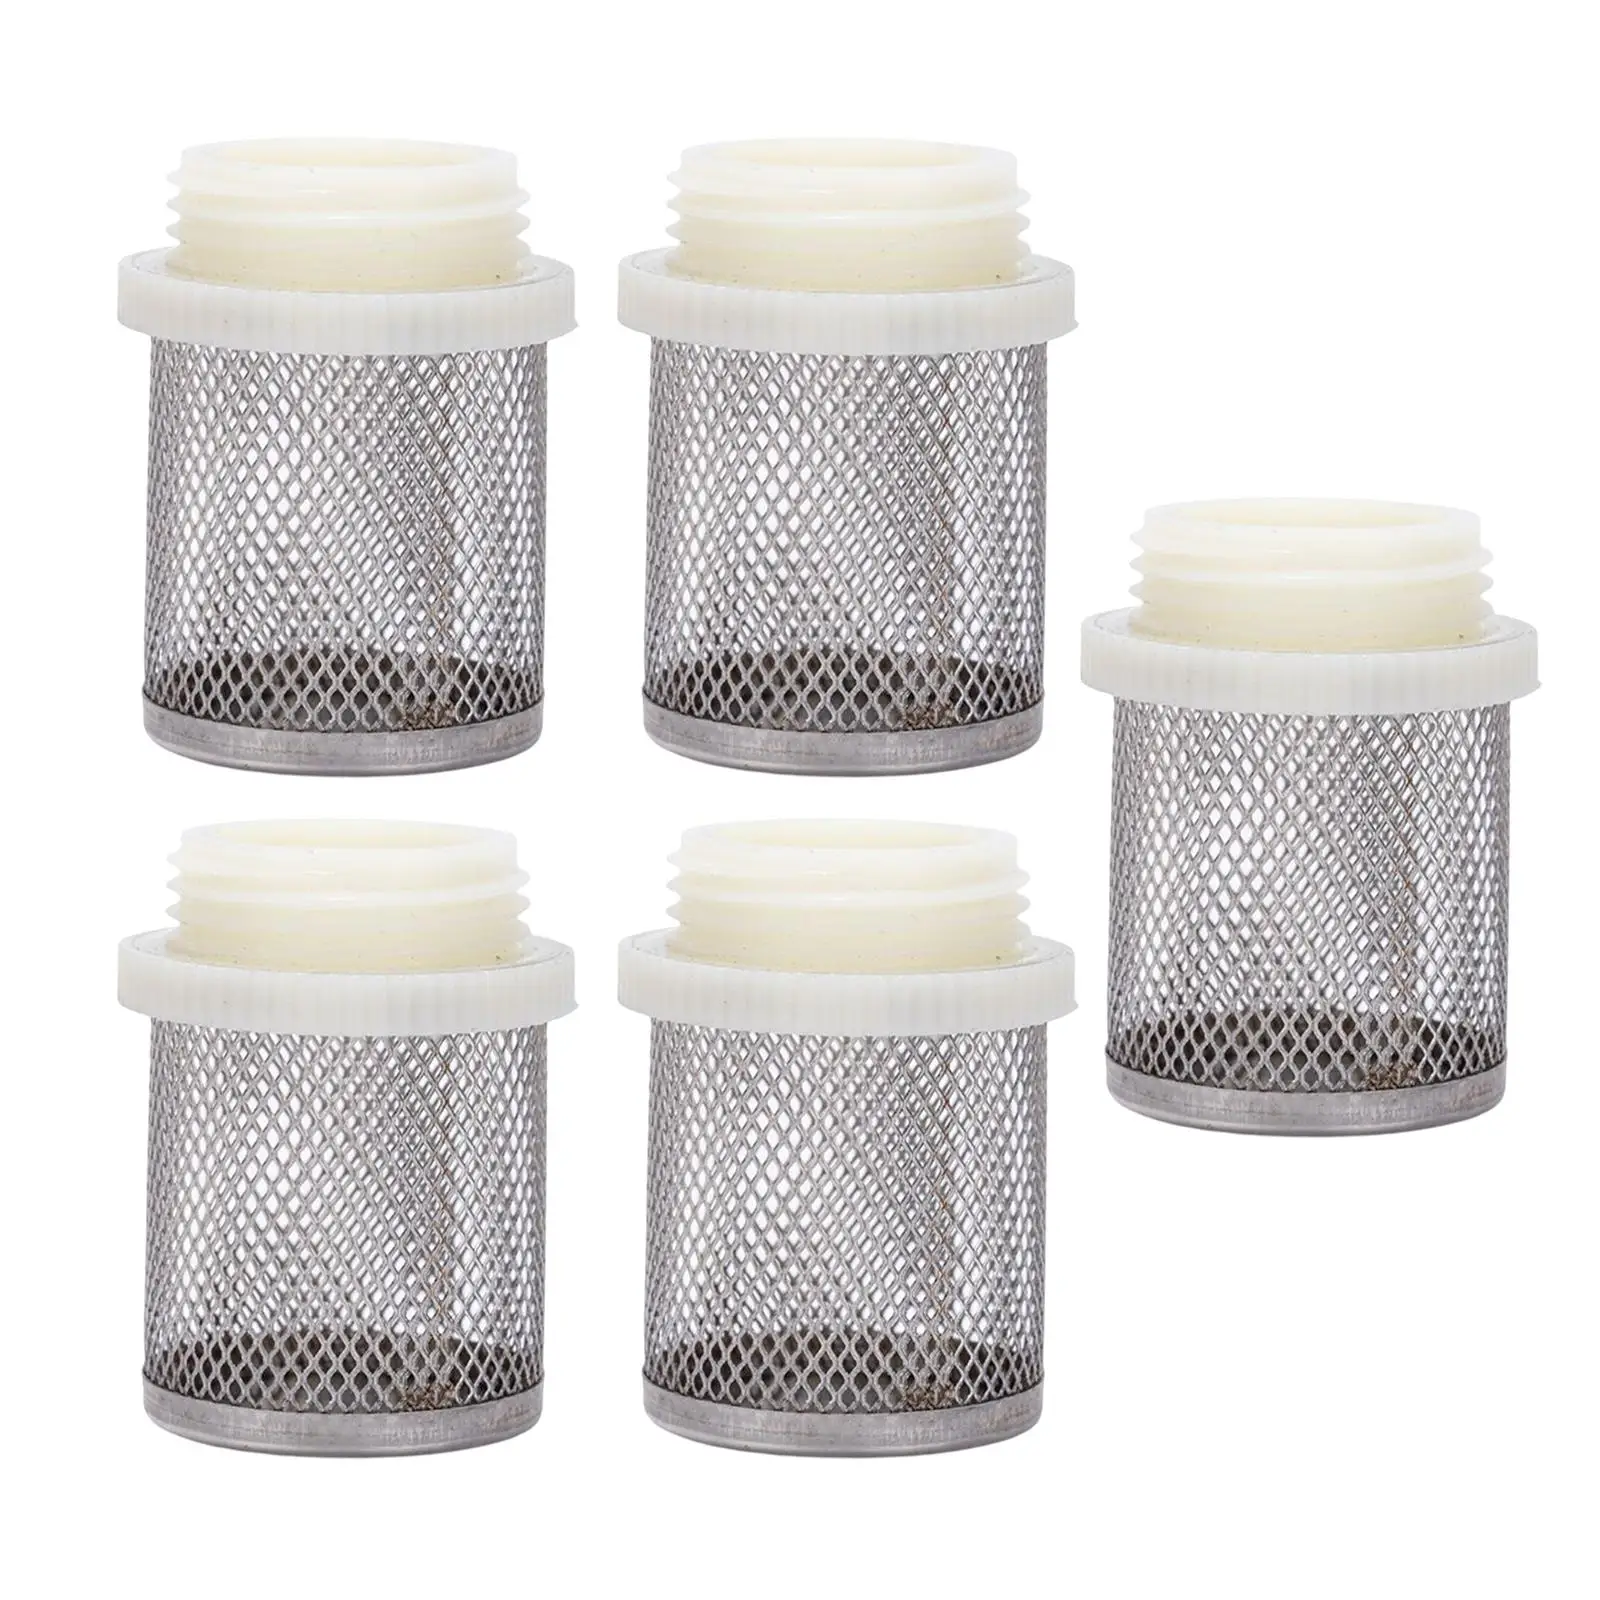 5x Multifunctional Hose Filter Stainless Steel Mesh Filter Accessories Replacements for Greenhouse Home Lawn Garden Farm